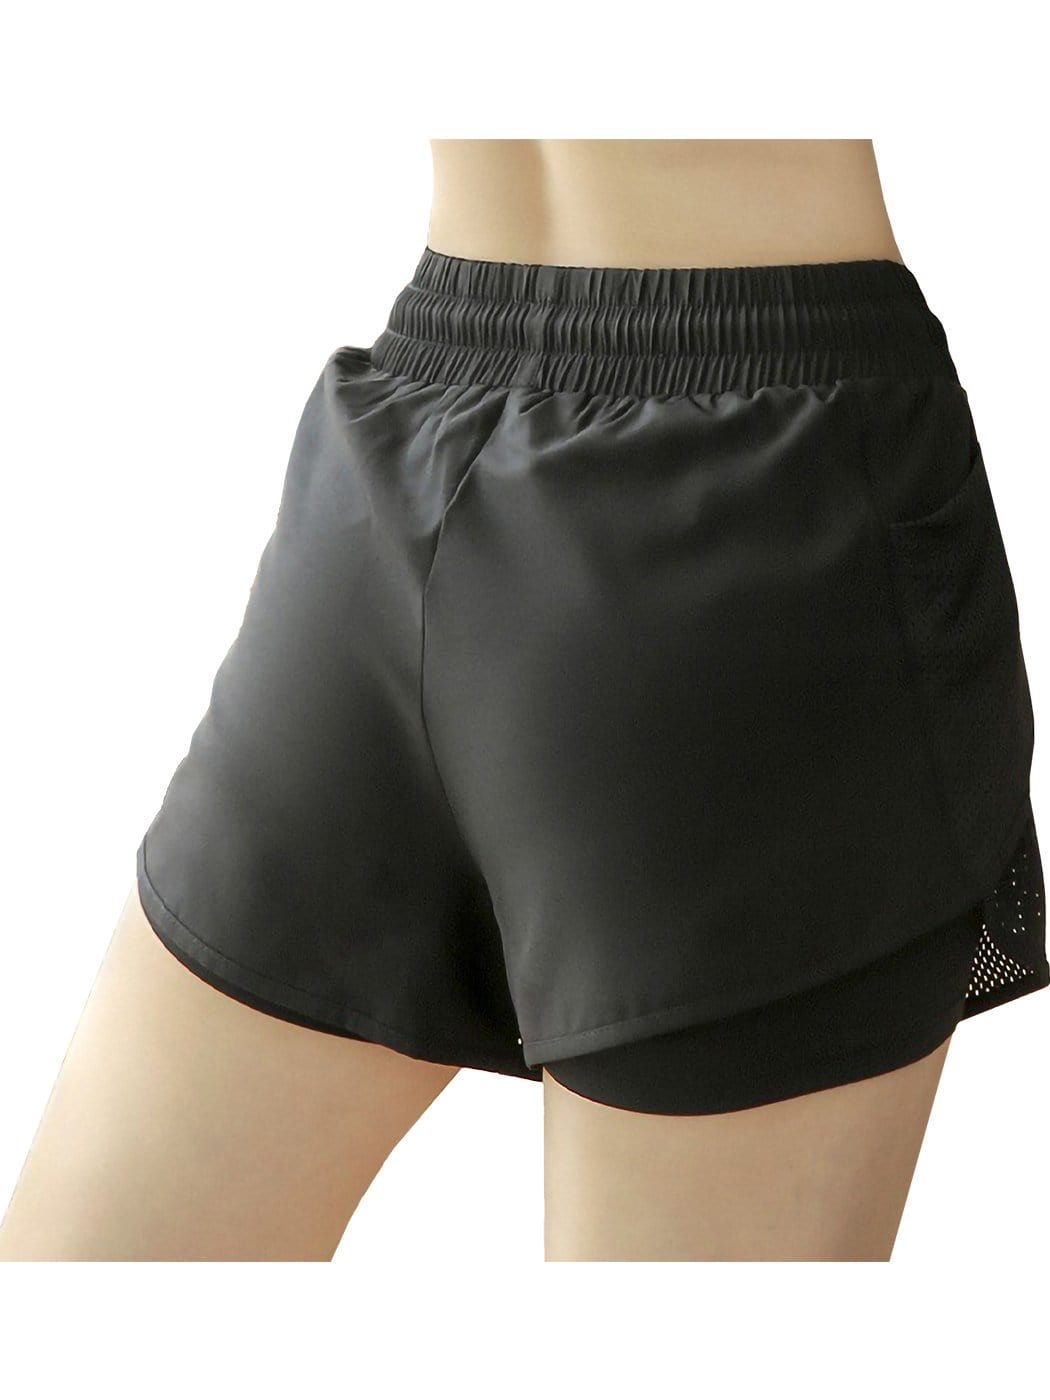 MIER Men Quick Dry Running Shorts with Zipper Pocket 7 Inch